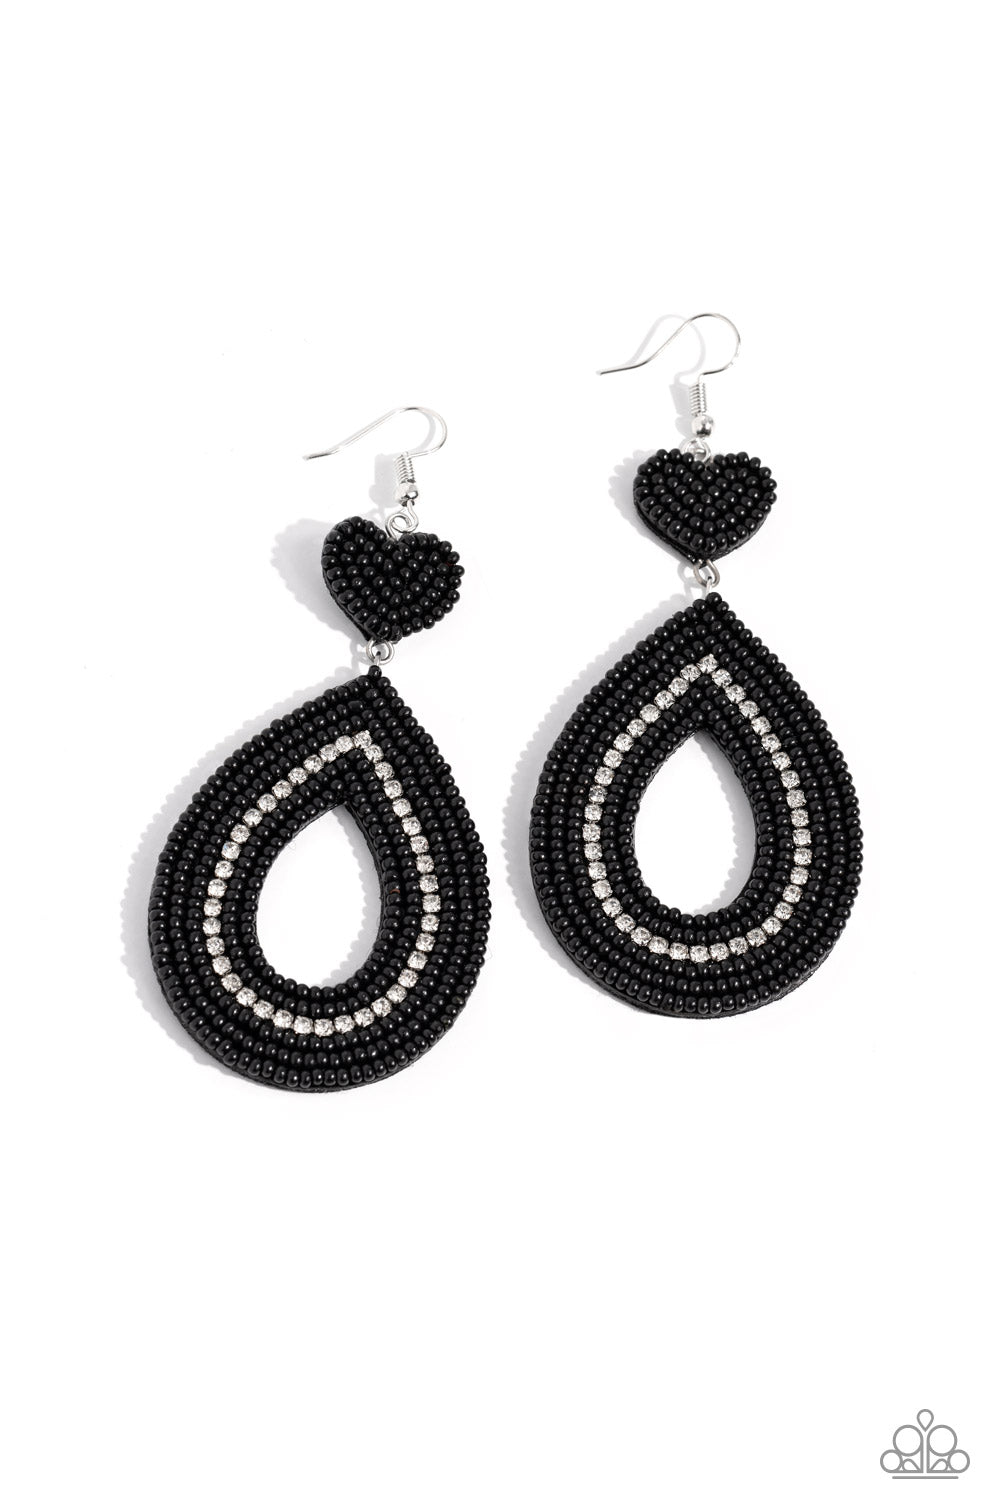 five-dollar-jewelry-now-seed-here-black-earrings-paparazzi-accessories